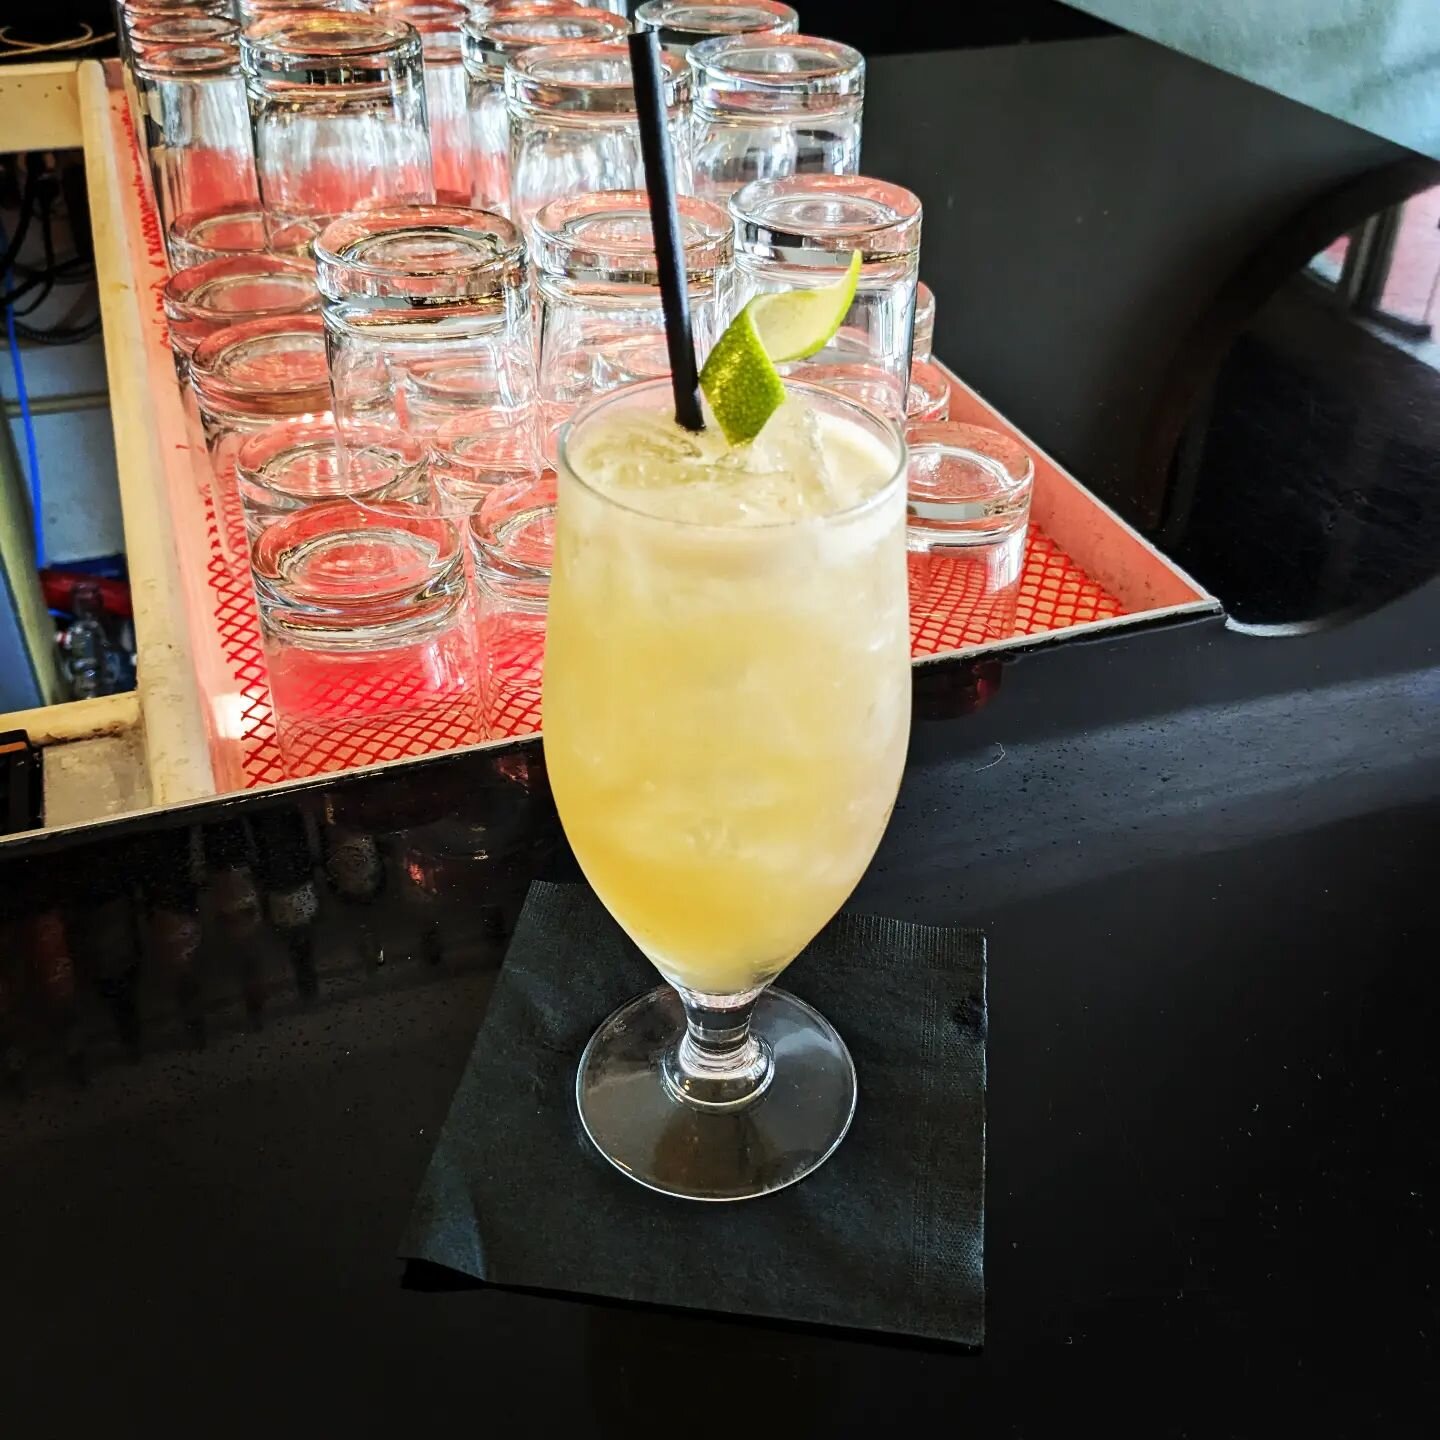 It's $10 Tuesday at The Dime. You'll win with this &quot;Shell Game,&quot; featuring a split base of Coraz&oacute;n Reposado Tequila and Del Maguey Vida Mezcal, lime juice, Heirloom Pineapple Amaro, ginger syrup, Cynar, and a splash of seltzer. Tropi